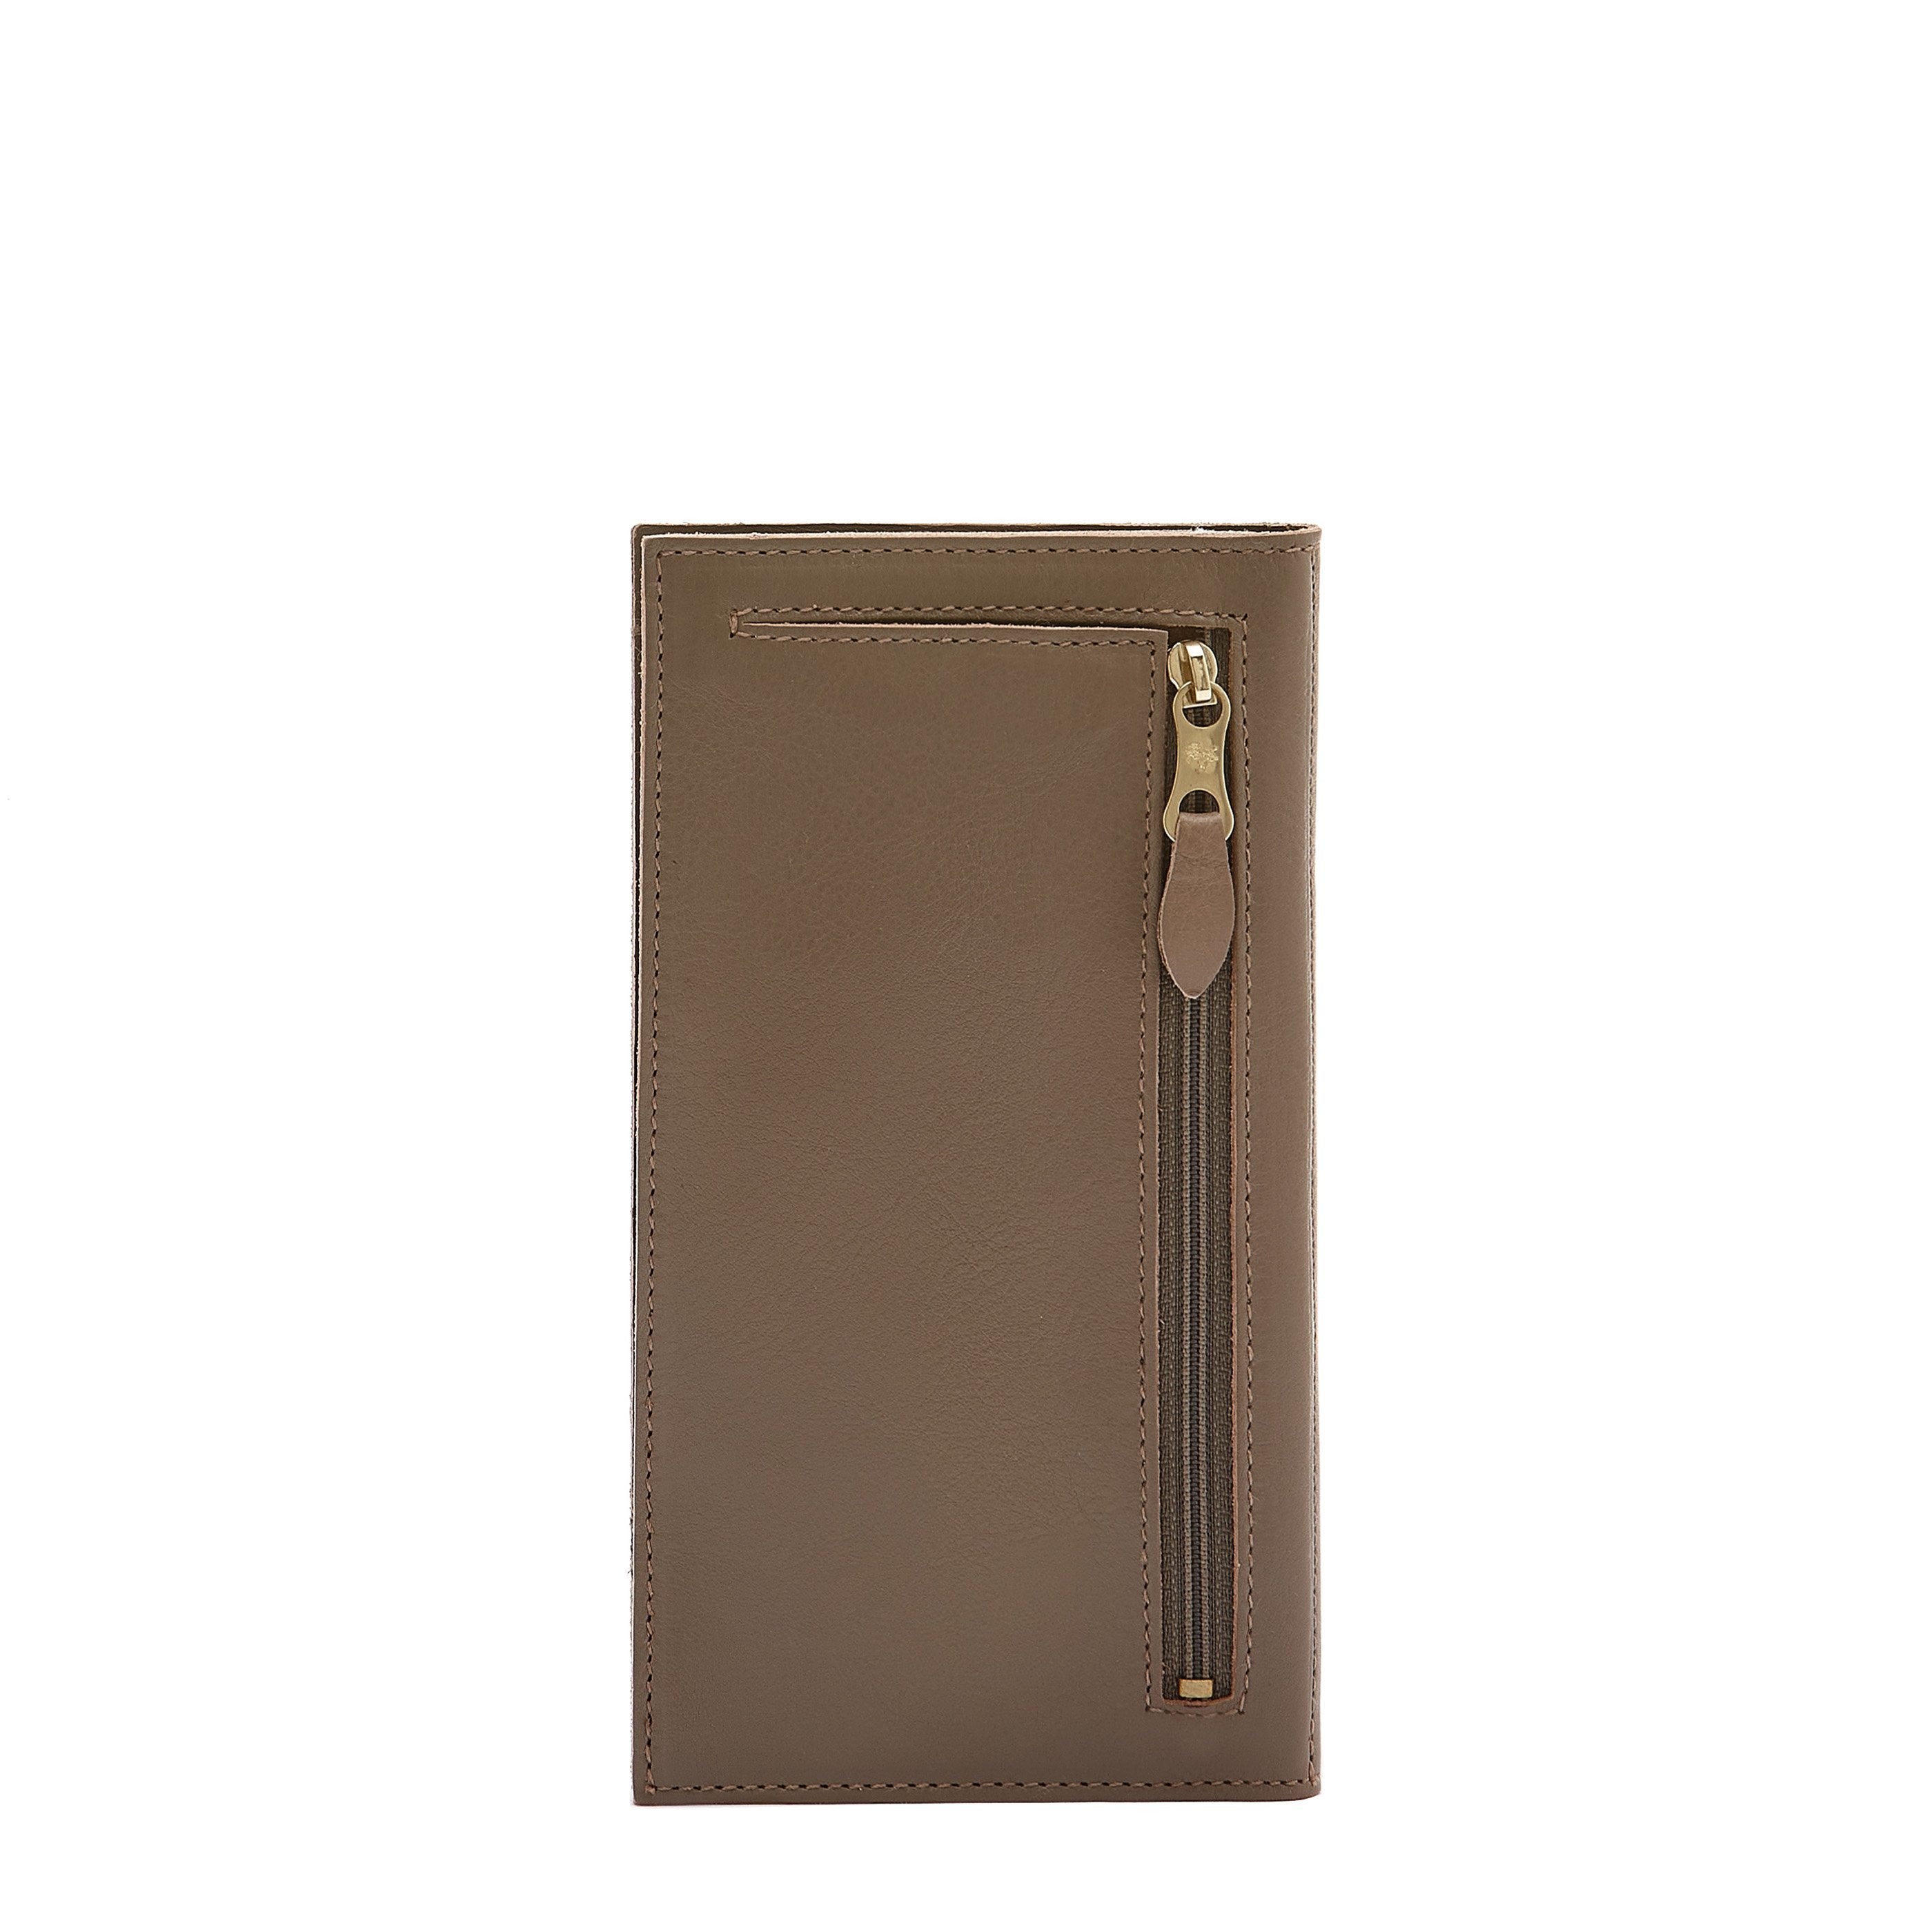 Wallet in calf leather color light grey